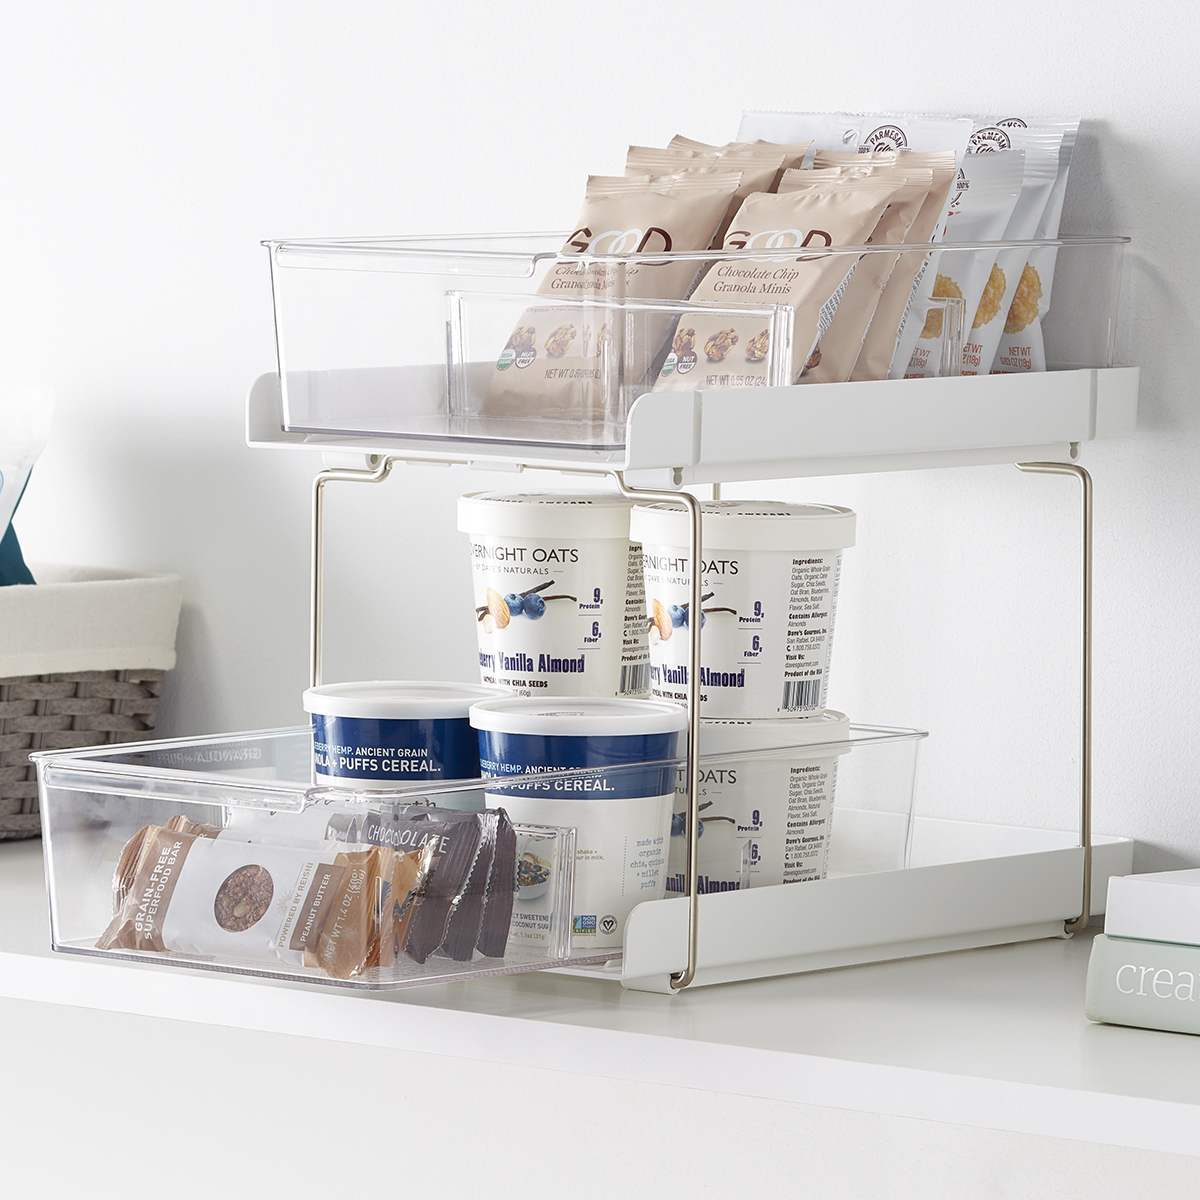 https://www.containerstore.com/catalogimages/415266/10083349-two-drawer-cabinet-organize.jpg